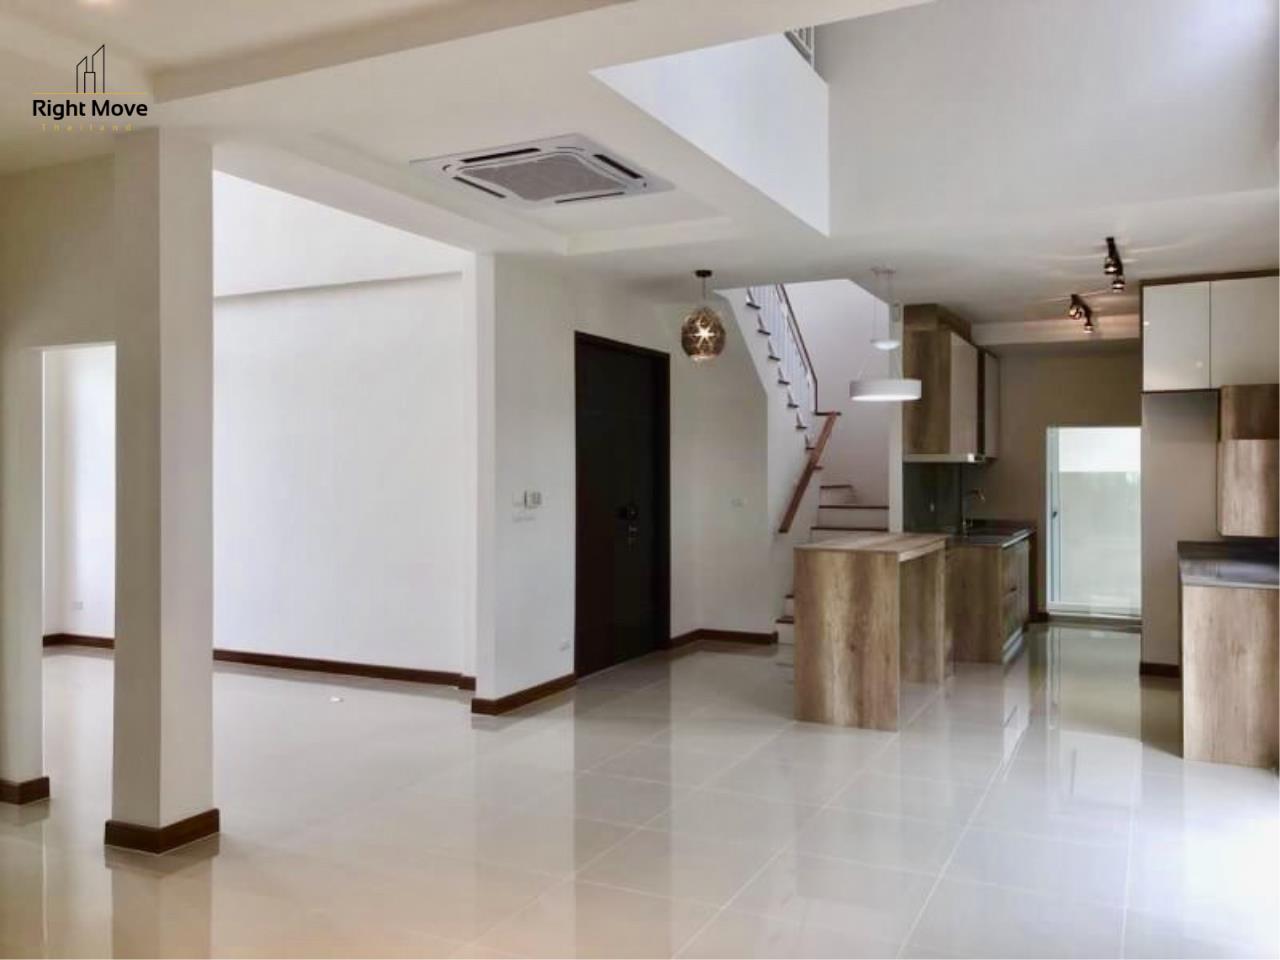 Right Move Thailand Agency's HR915  VILLA ARCADIA SRINAKARIN COMPOUND HOUSE FOR RENT 80,000 THB - 4 BEDROOM - 85 SQ.Wah 5